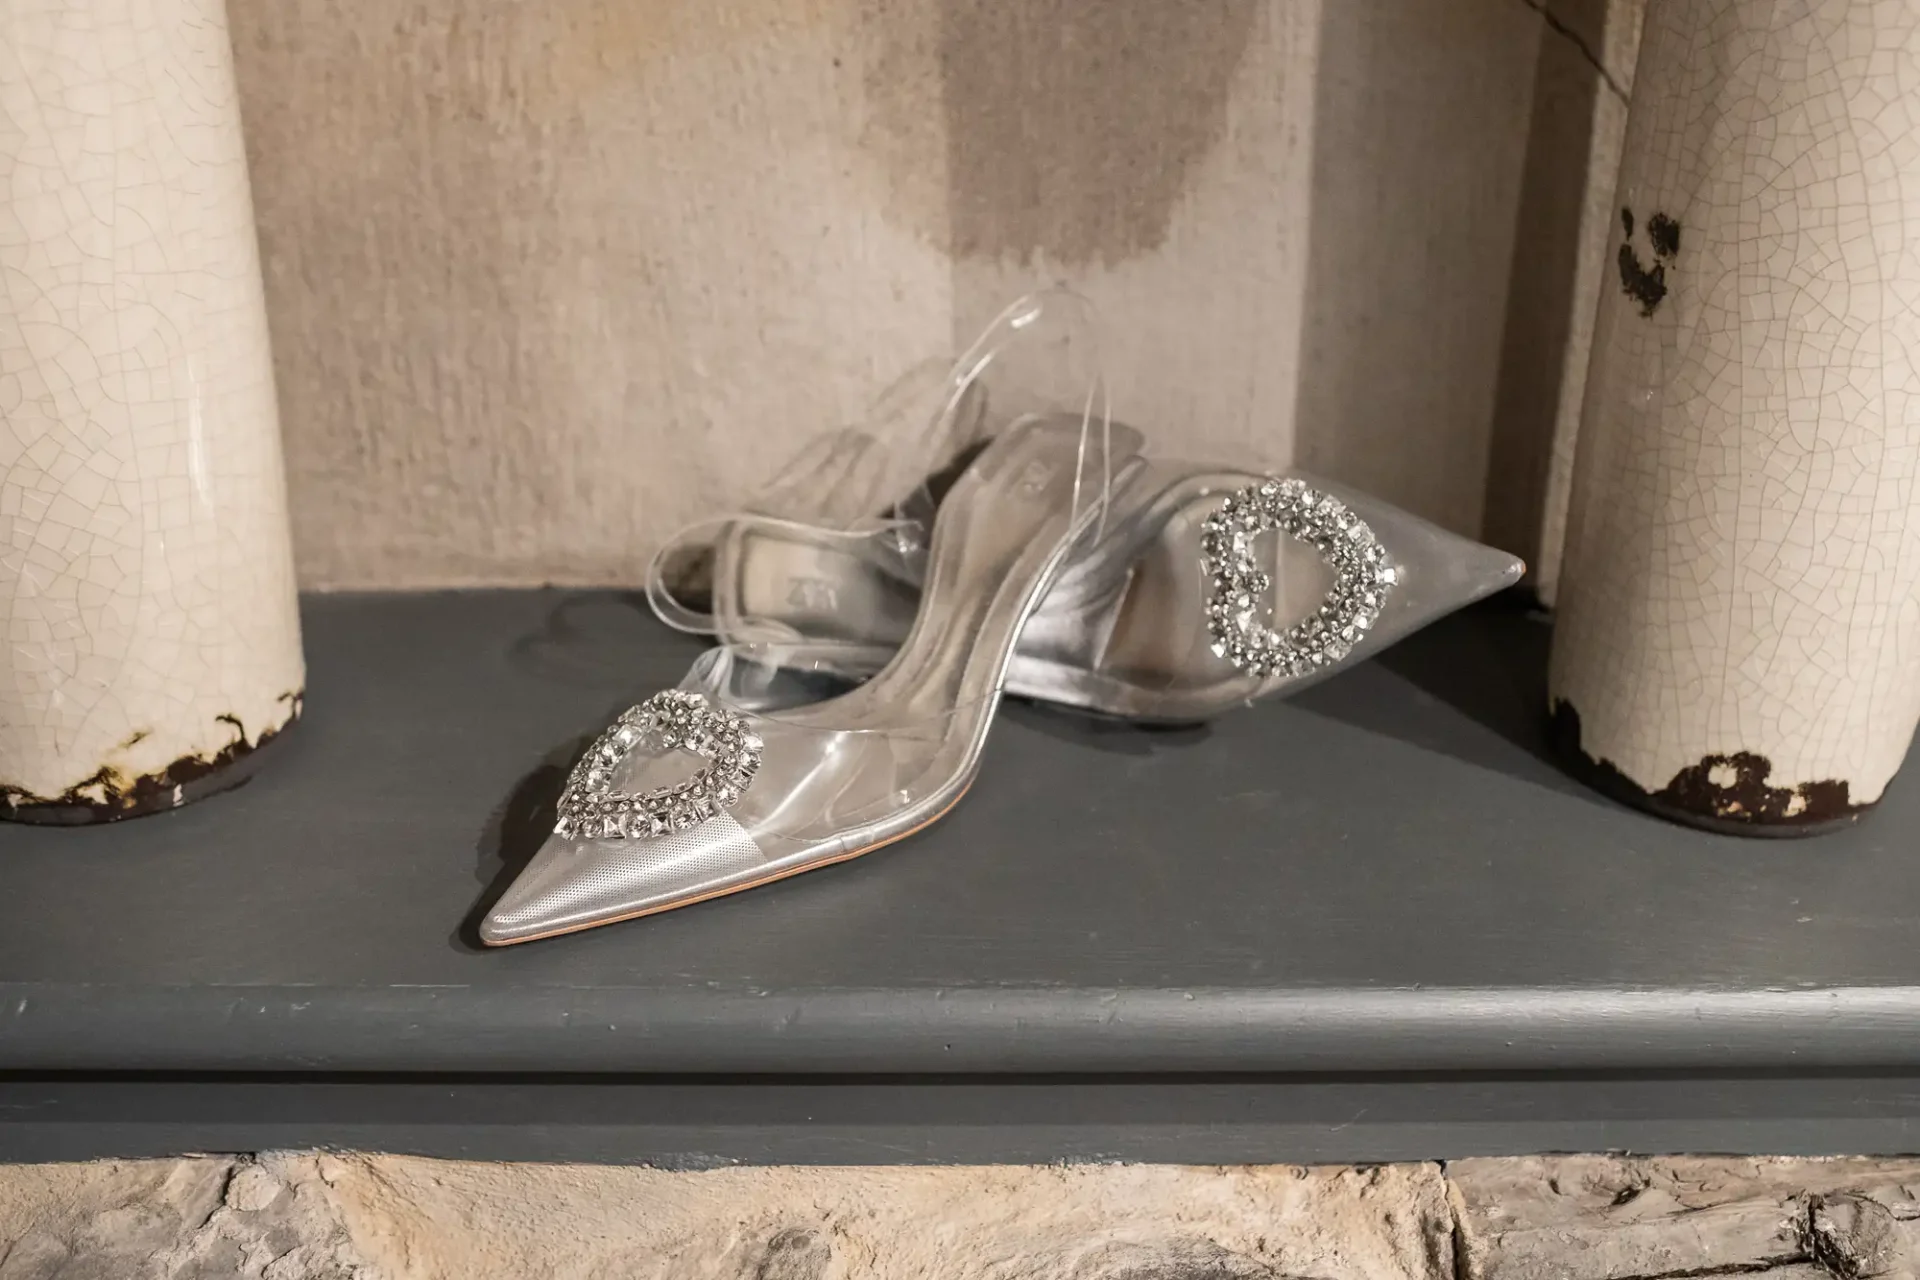 A pair of transparent high-heeled shoes with decorative crystals on the toes, displayed on a gray shelf against an aged, peeling column background.